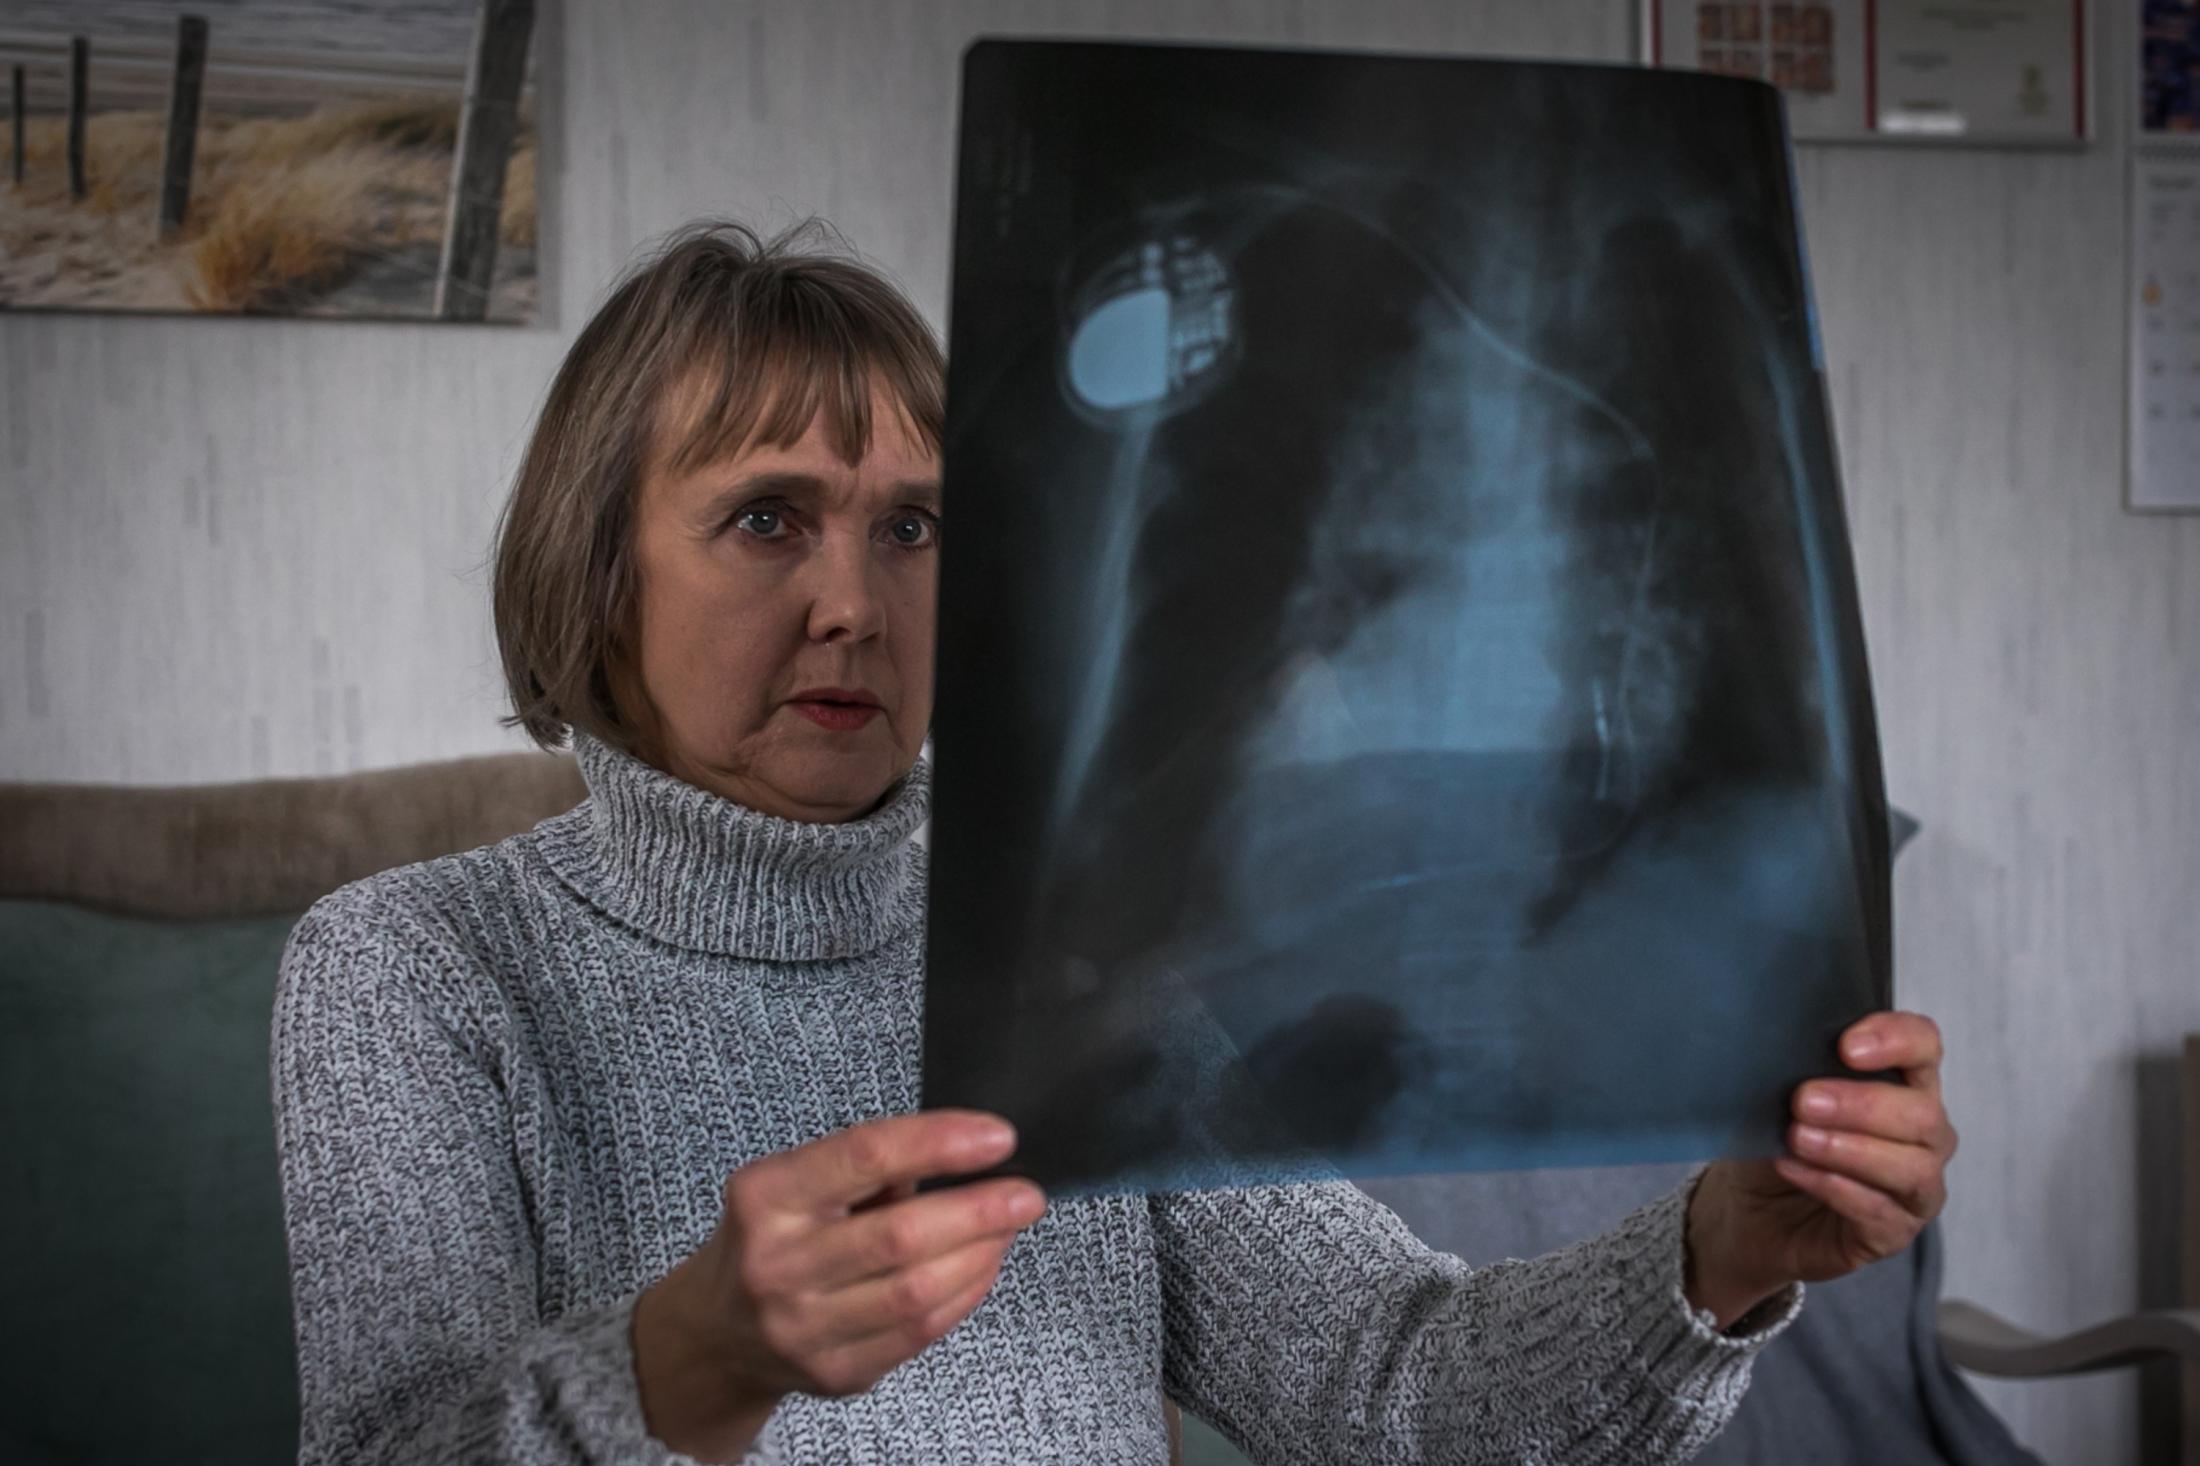 AIR POLLUTION- for NRC - Aleksandr Bedek looks at an x-ray of her mother, who died...